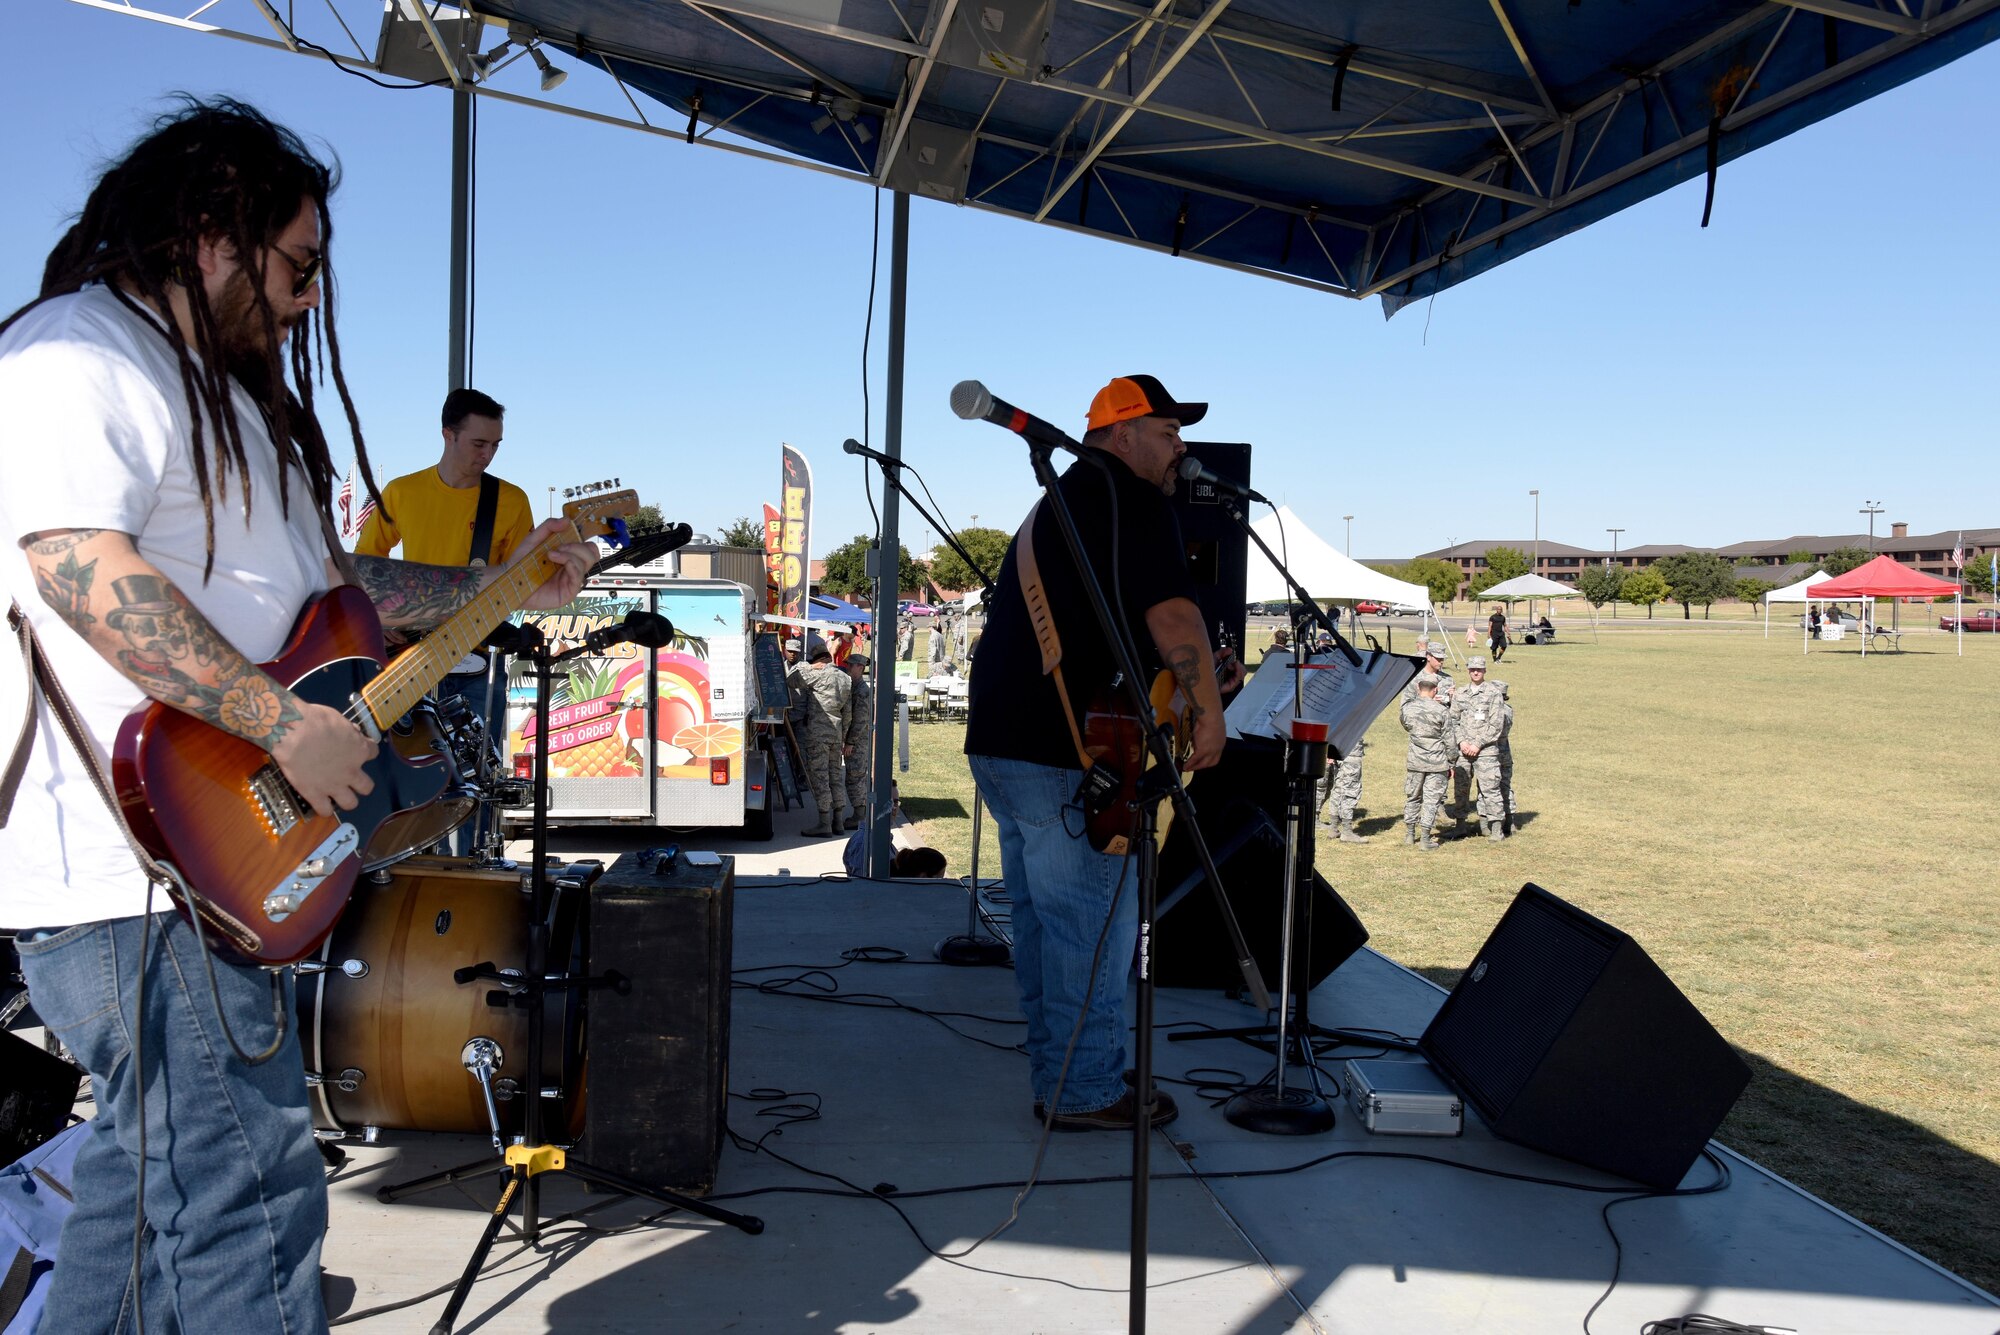 The Back Road Trubadors play for the Make Goodfellow Great Trucktoberfest event at the parade grounds on Goodfellow Air Force Base, Texas, Oct. 21, 2016. During Trucktoberfest, individuals could sign up for a Goodfellow club or get food from various local food truck vendors. (U.S. Air Force photo by Senior Airman Joshua Edwards/Released)